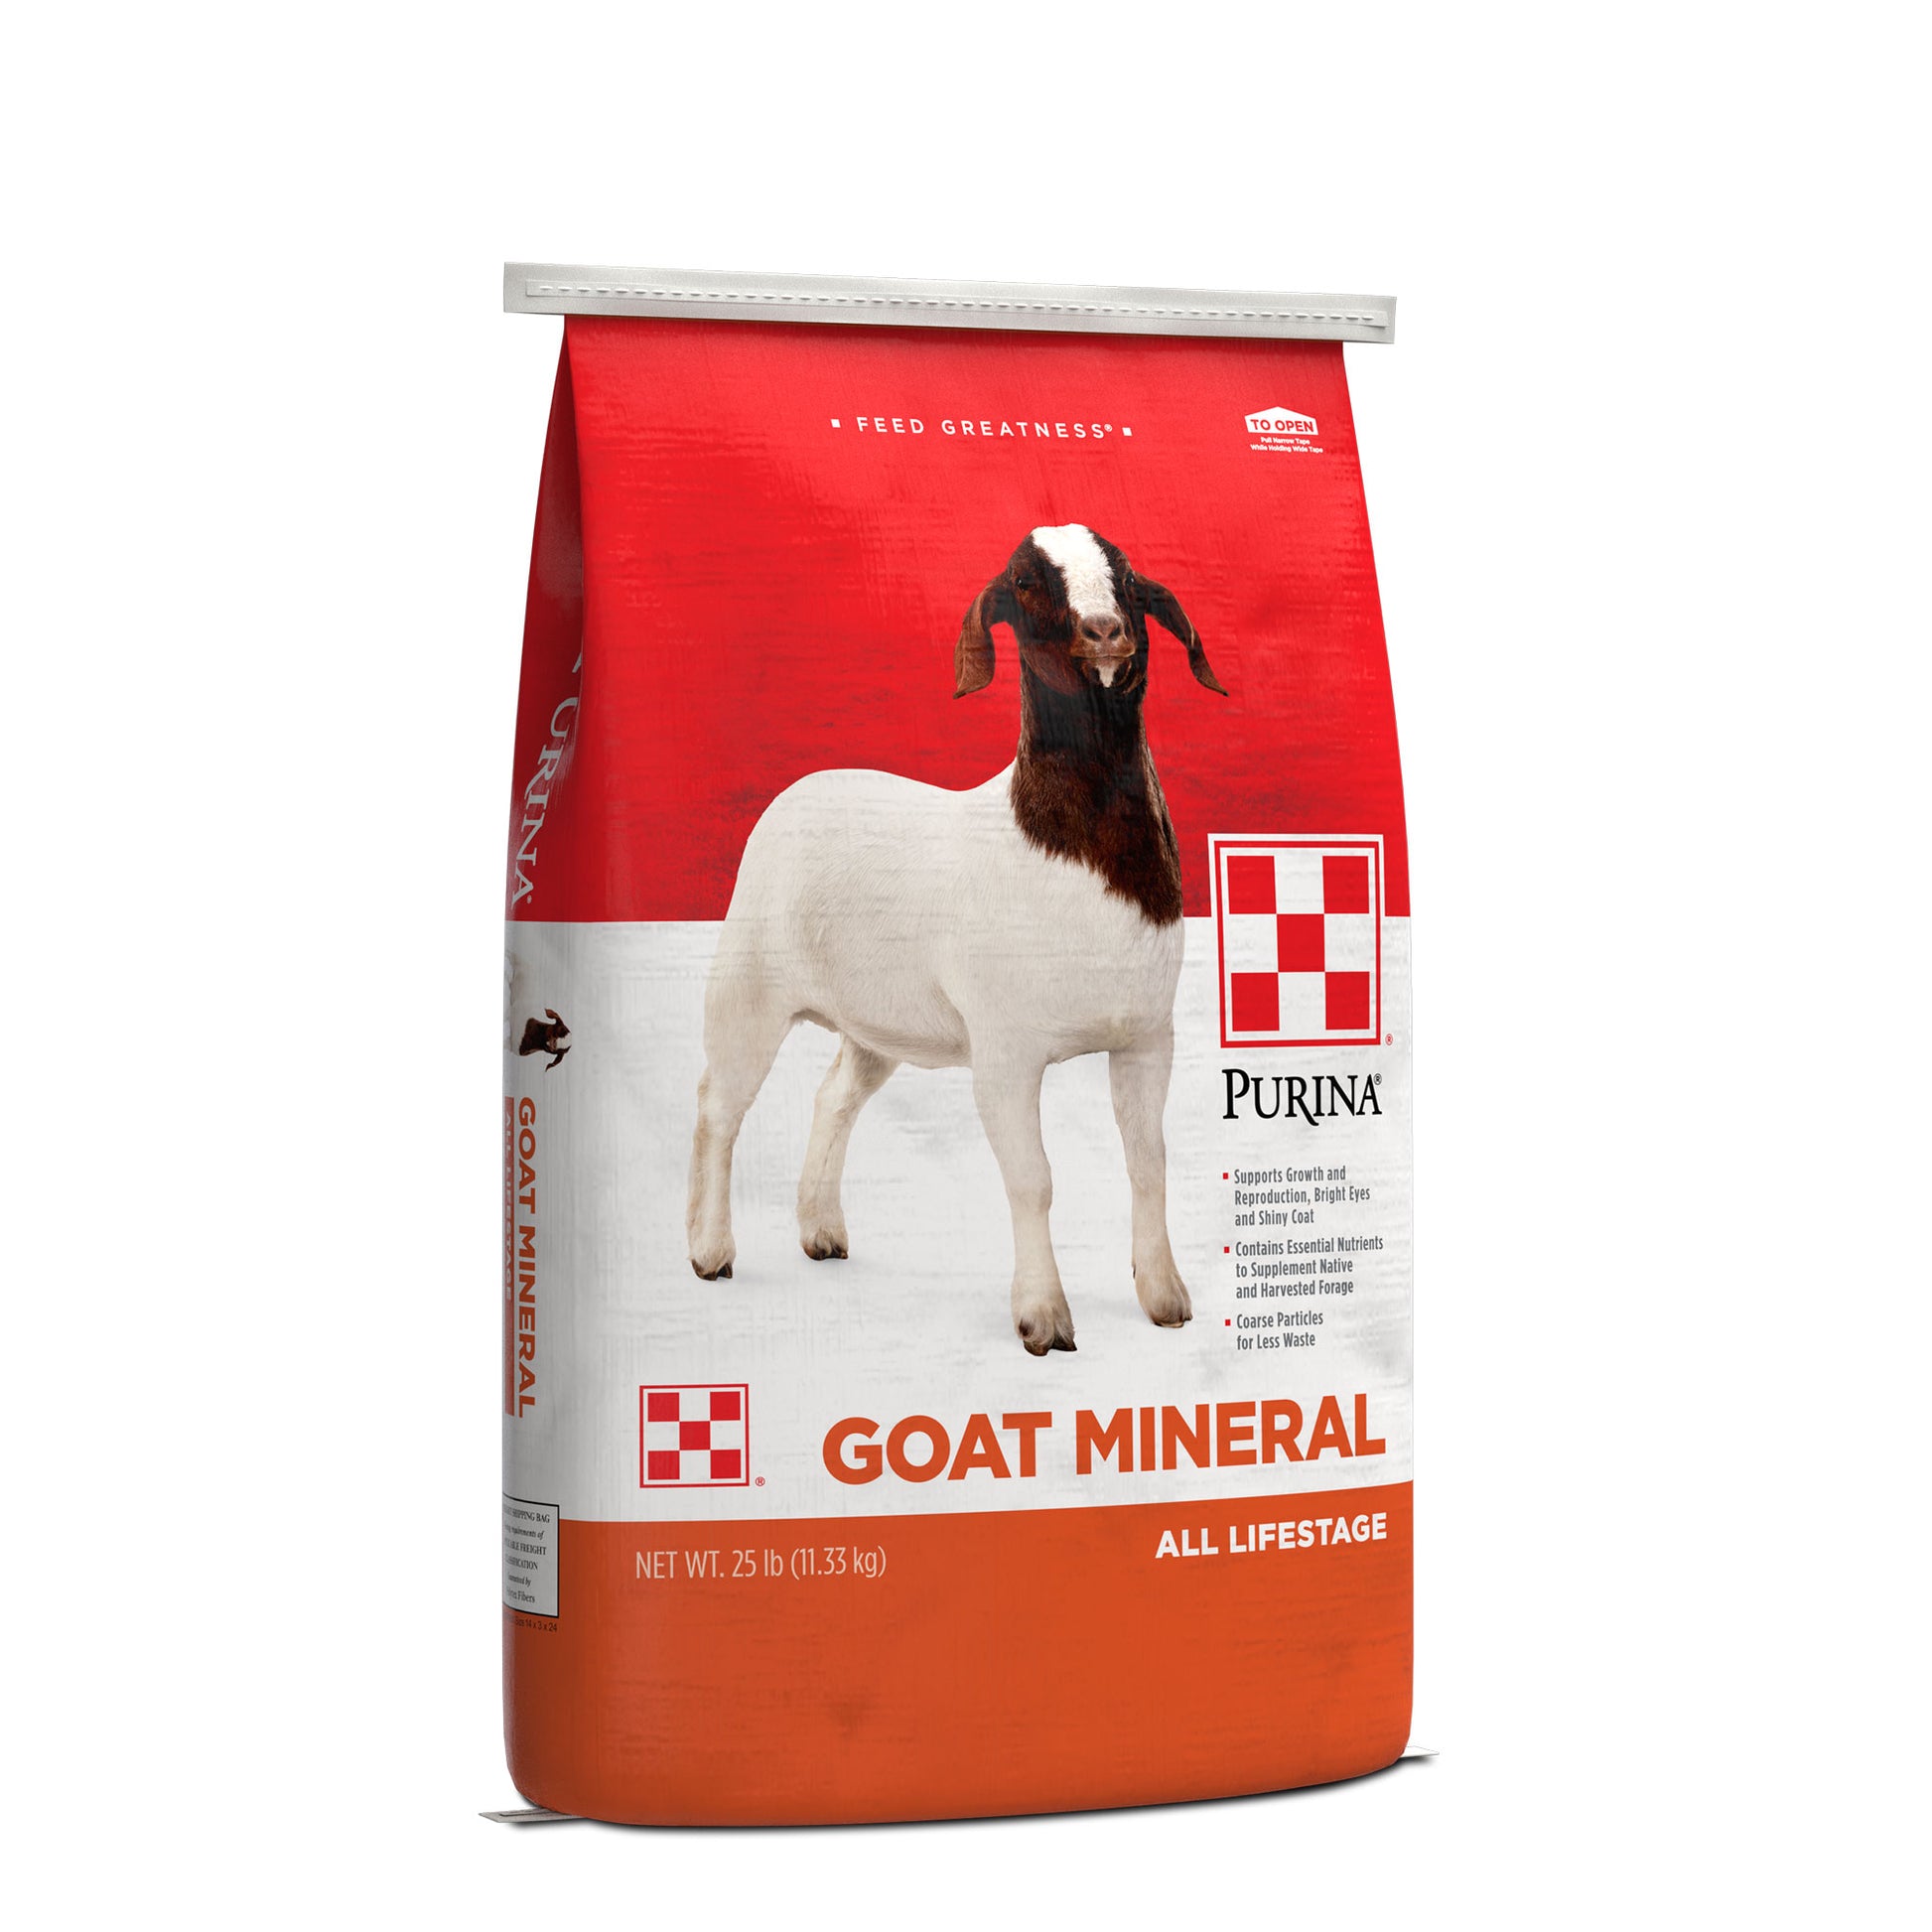 purina-goat-mineral-supplement-support-your-goat-s-health-purina